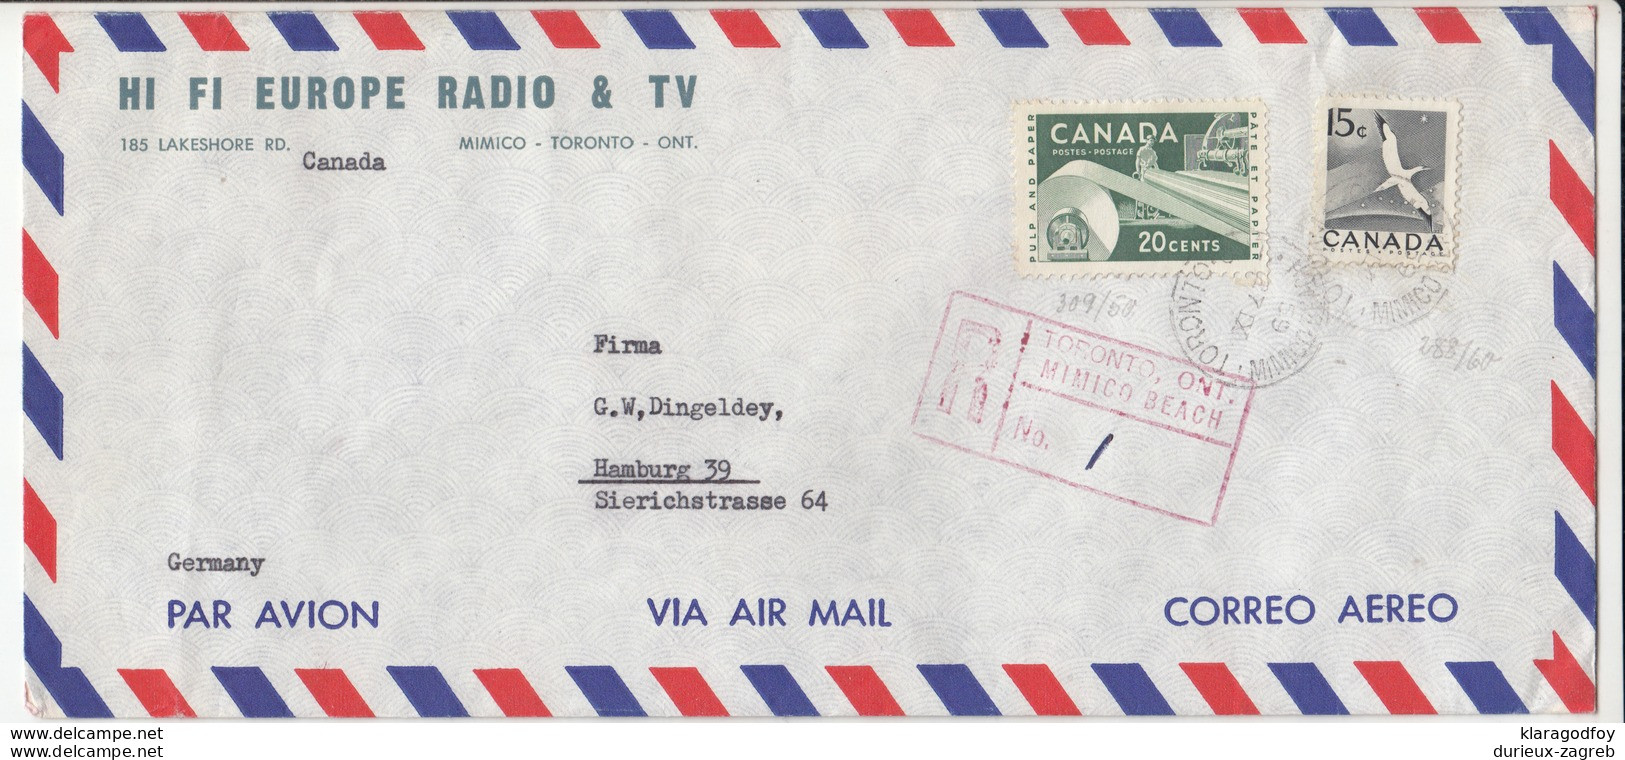 Canada, Hi Fi Europe Radio & TV Airmail Letter Cover Registered Travelled 1965 Toronto Pmk B180205 - Lettres & Documents